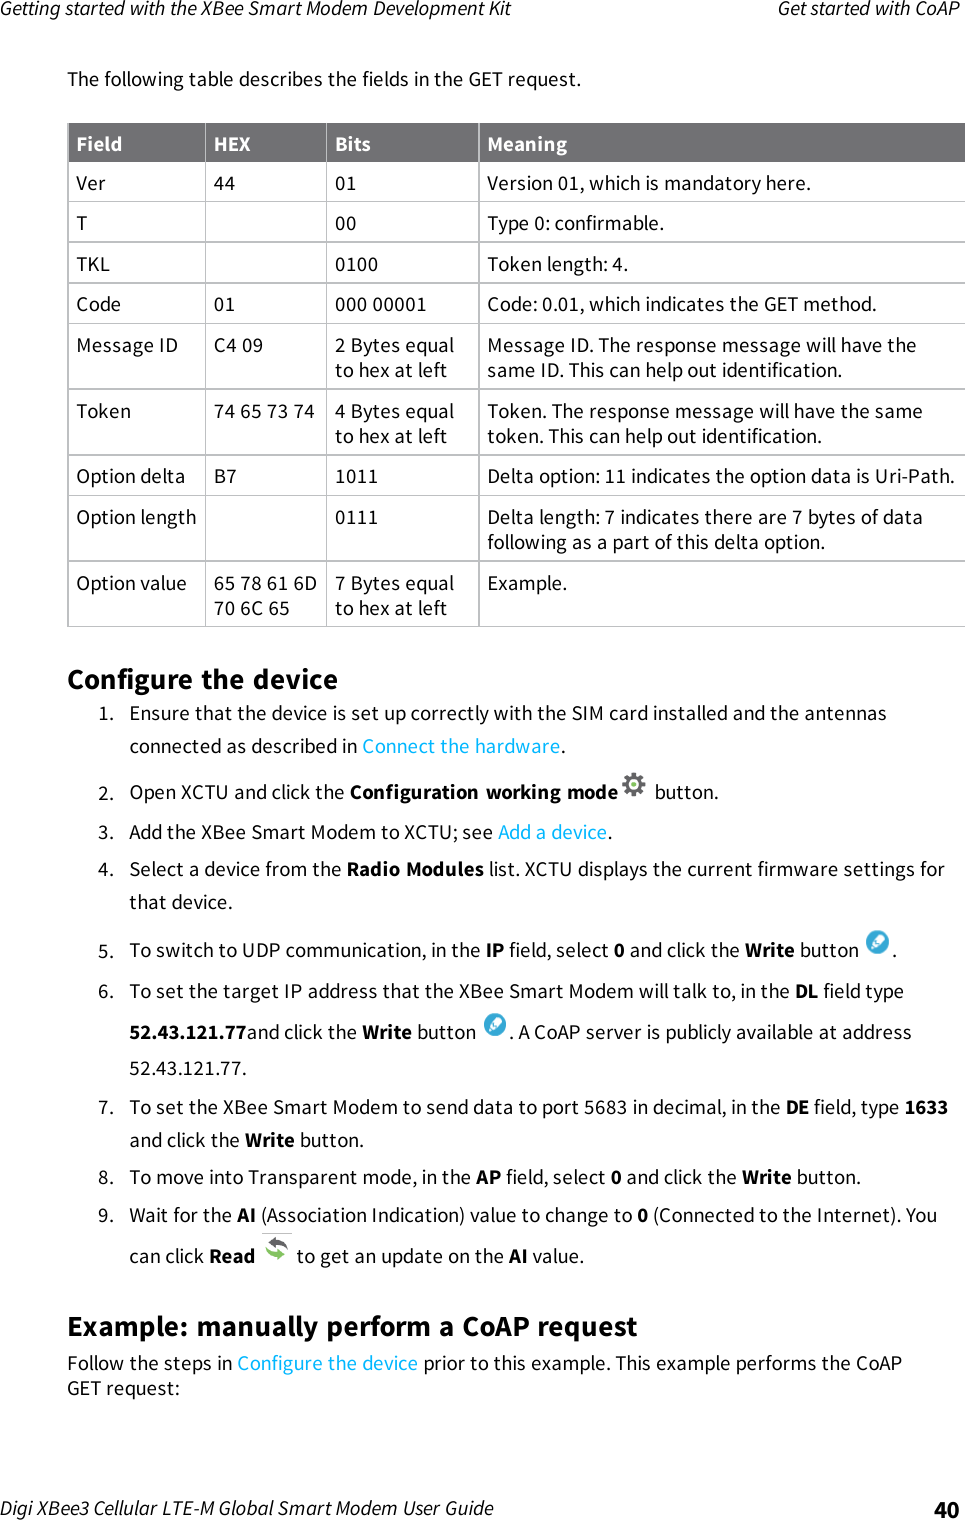 Page 40 of Digi XB3M1 XBee3 Cellular LTE-M User Manual 